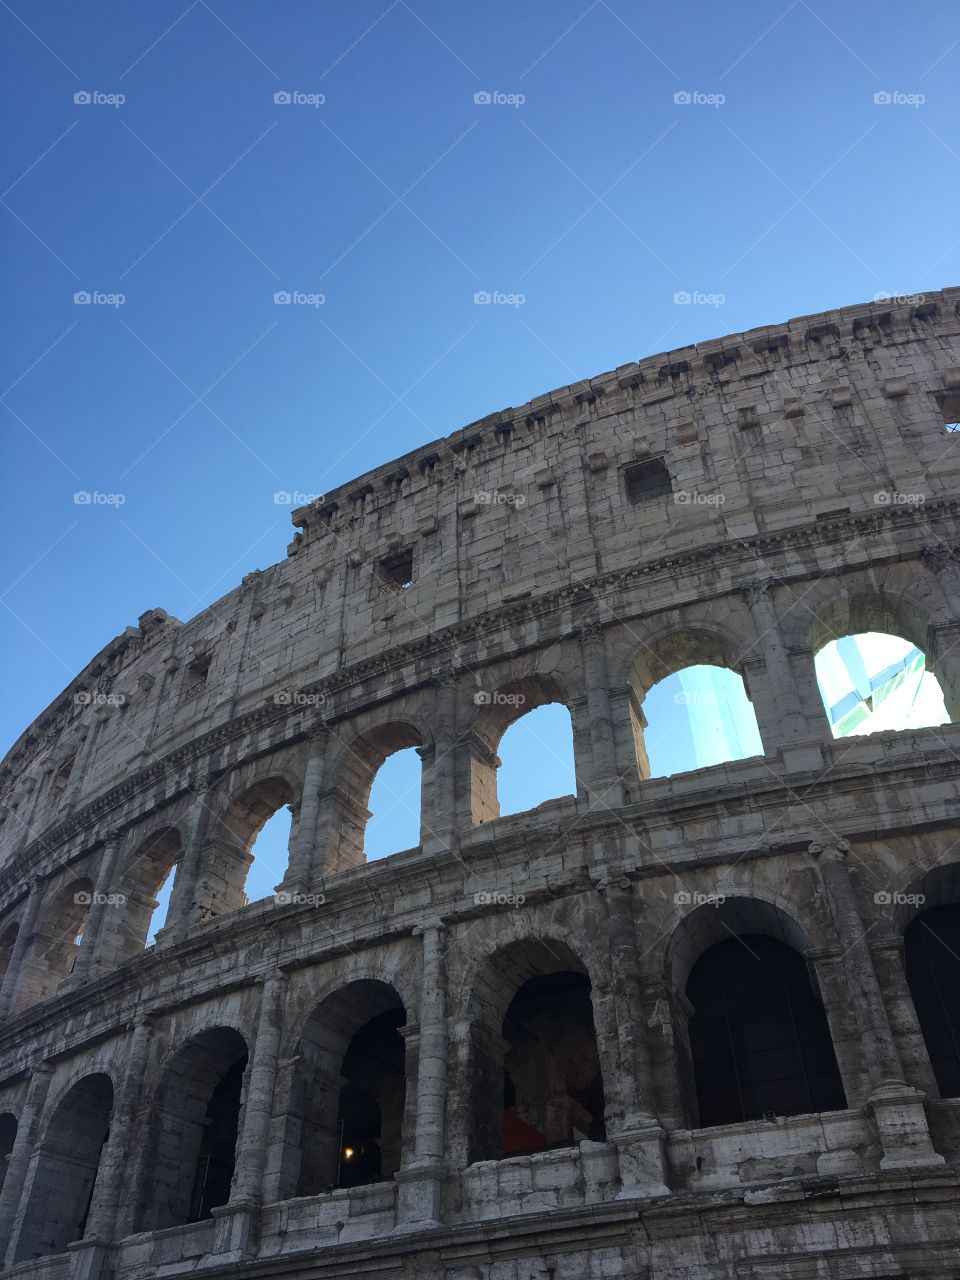 This photo was taken in Rome November 15th 